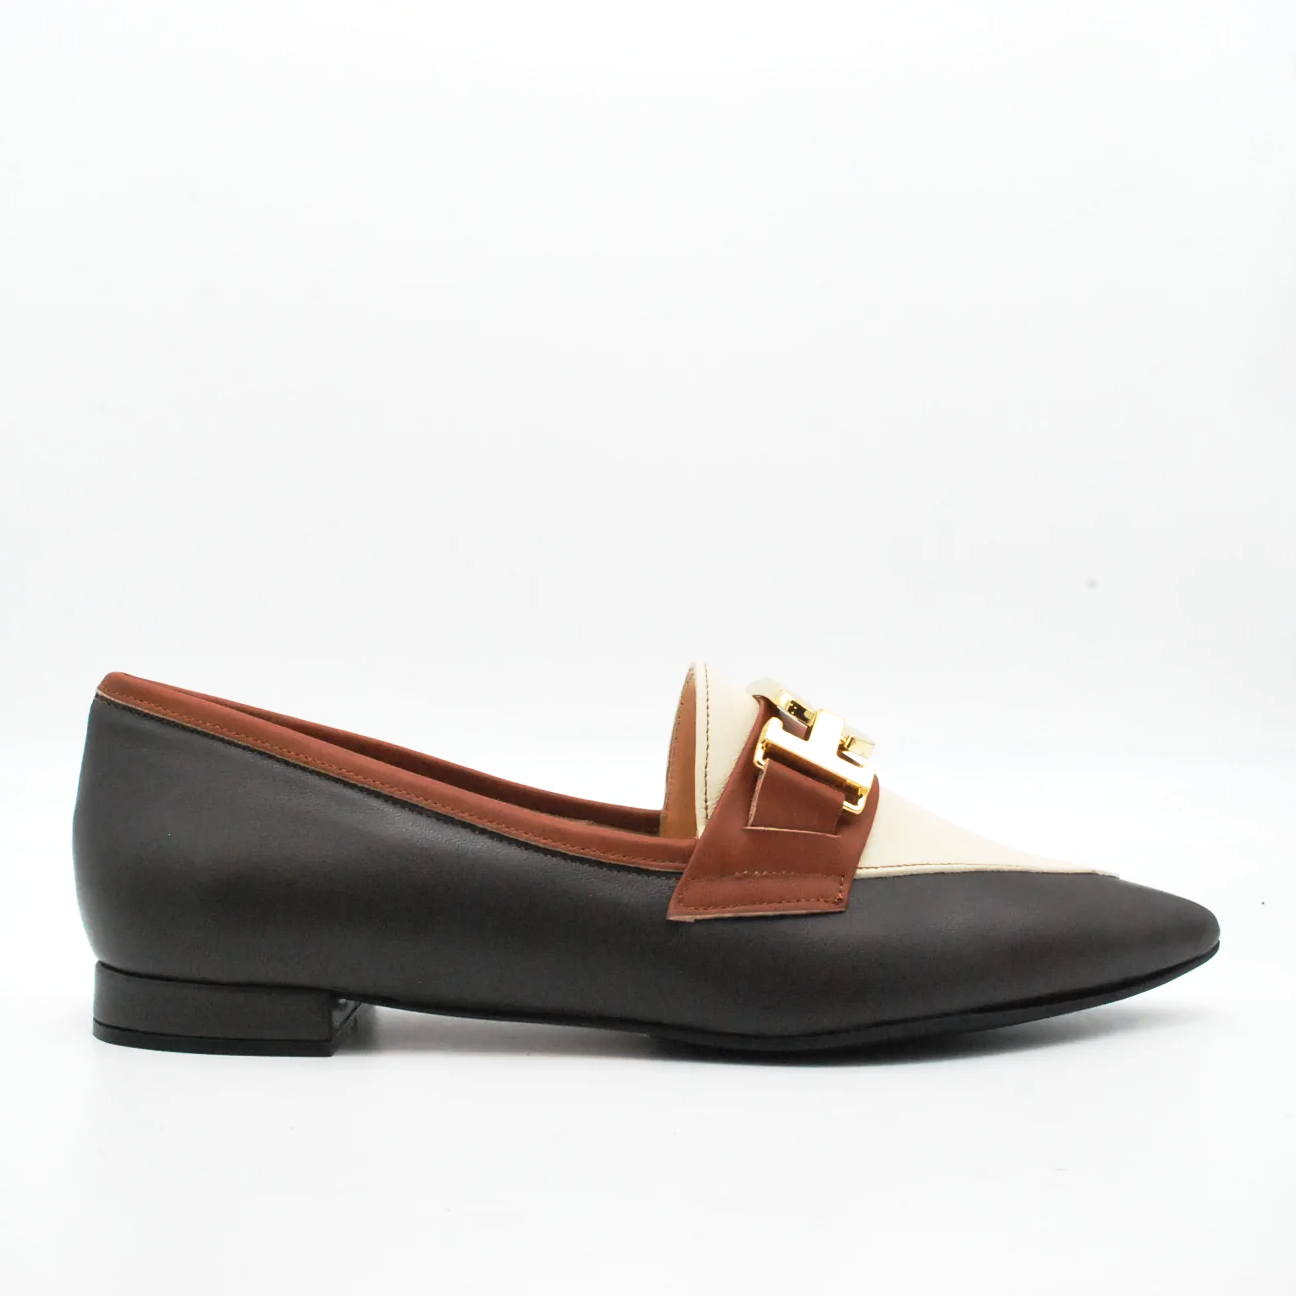 mocassino-nika-in-pelle-35-cuoio-pelle-mocassino_a01af7dc-2139-4554-b769-10205f18a994.png